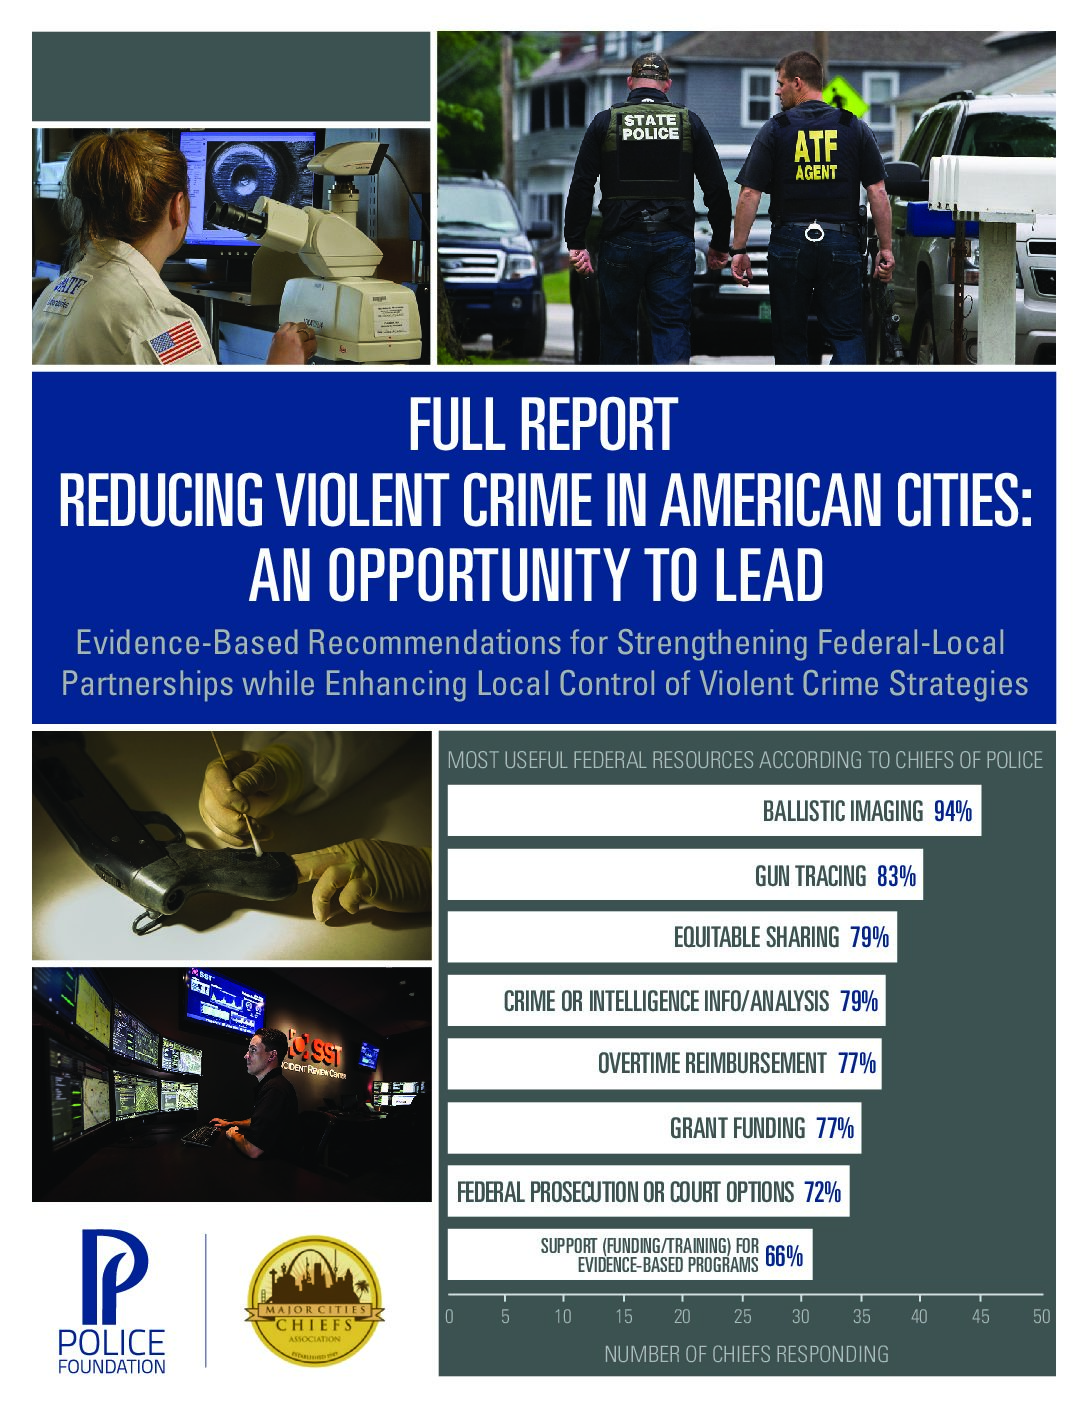 Reducing Violent Crime in Ameircan Cities-Full Report